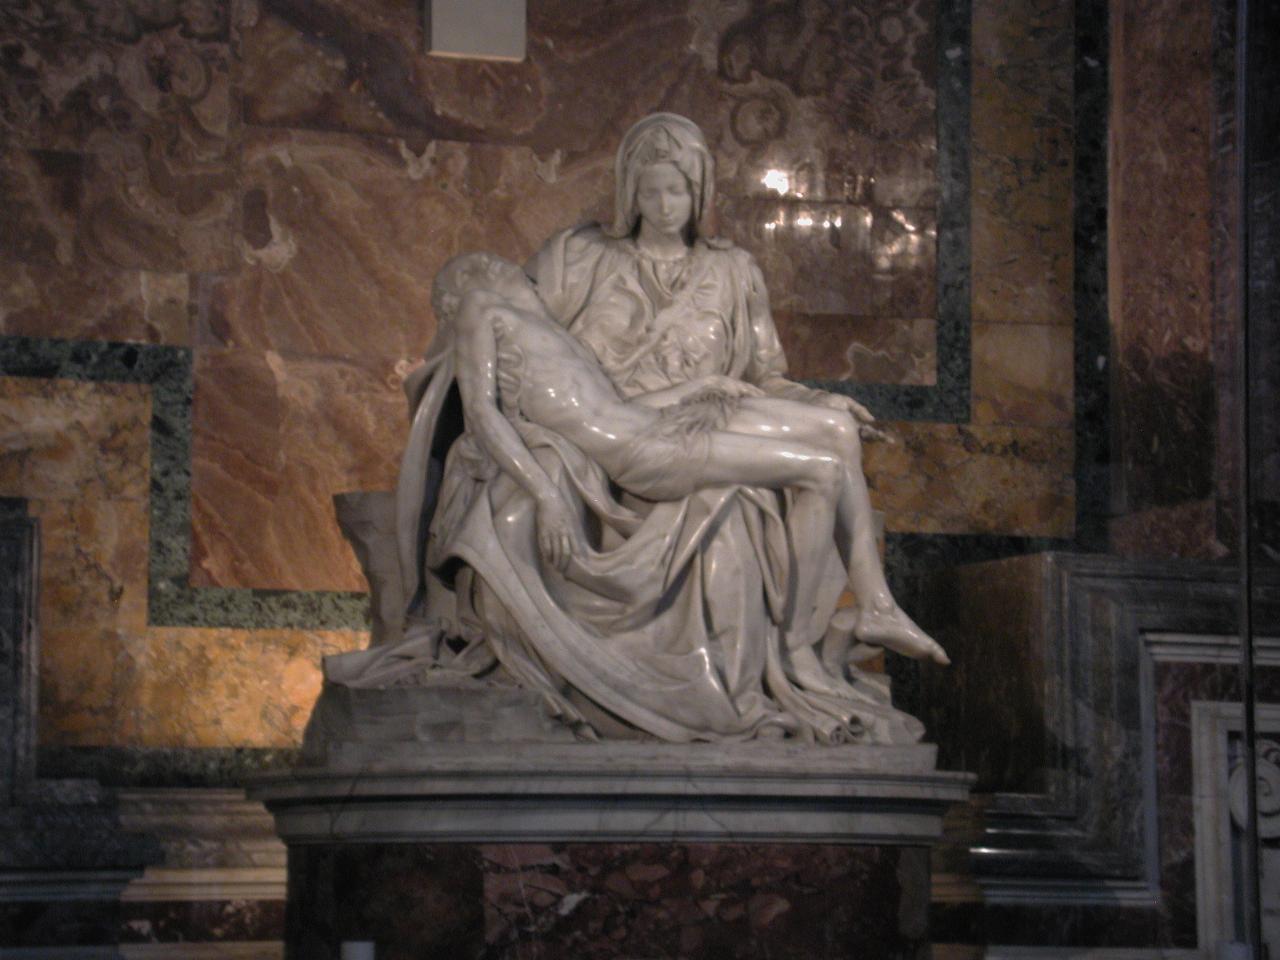 St. Peter's Pieta (there are several)